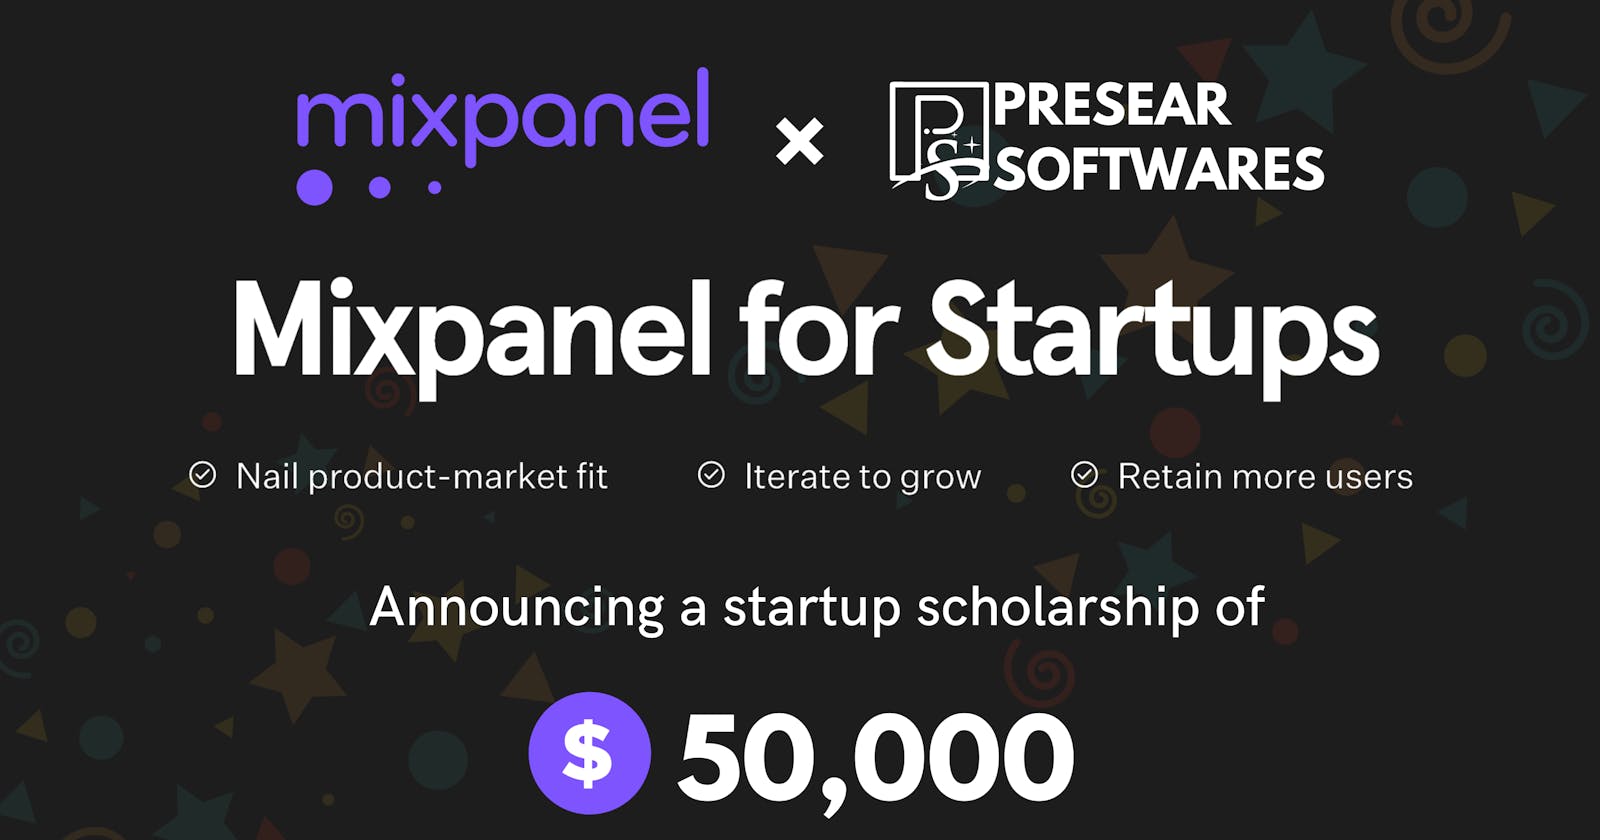 Presear Softwares has received a $50,000 startup scholarship from Mixpanel to work more toward product analytics